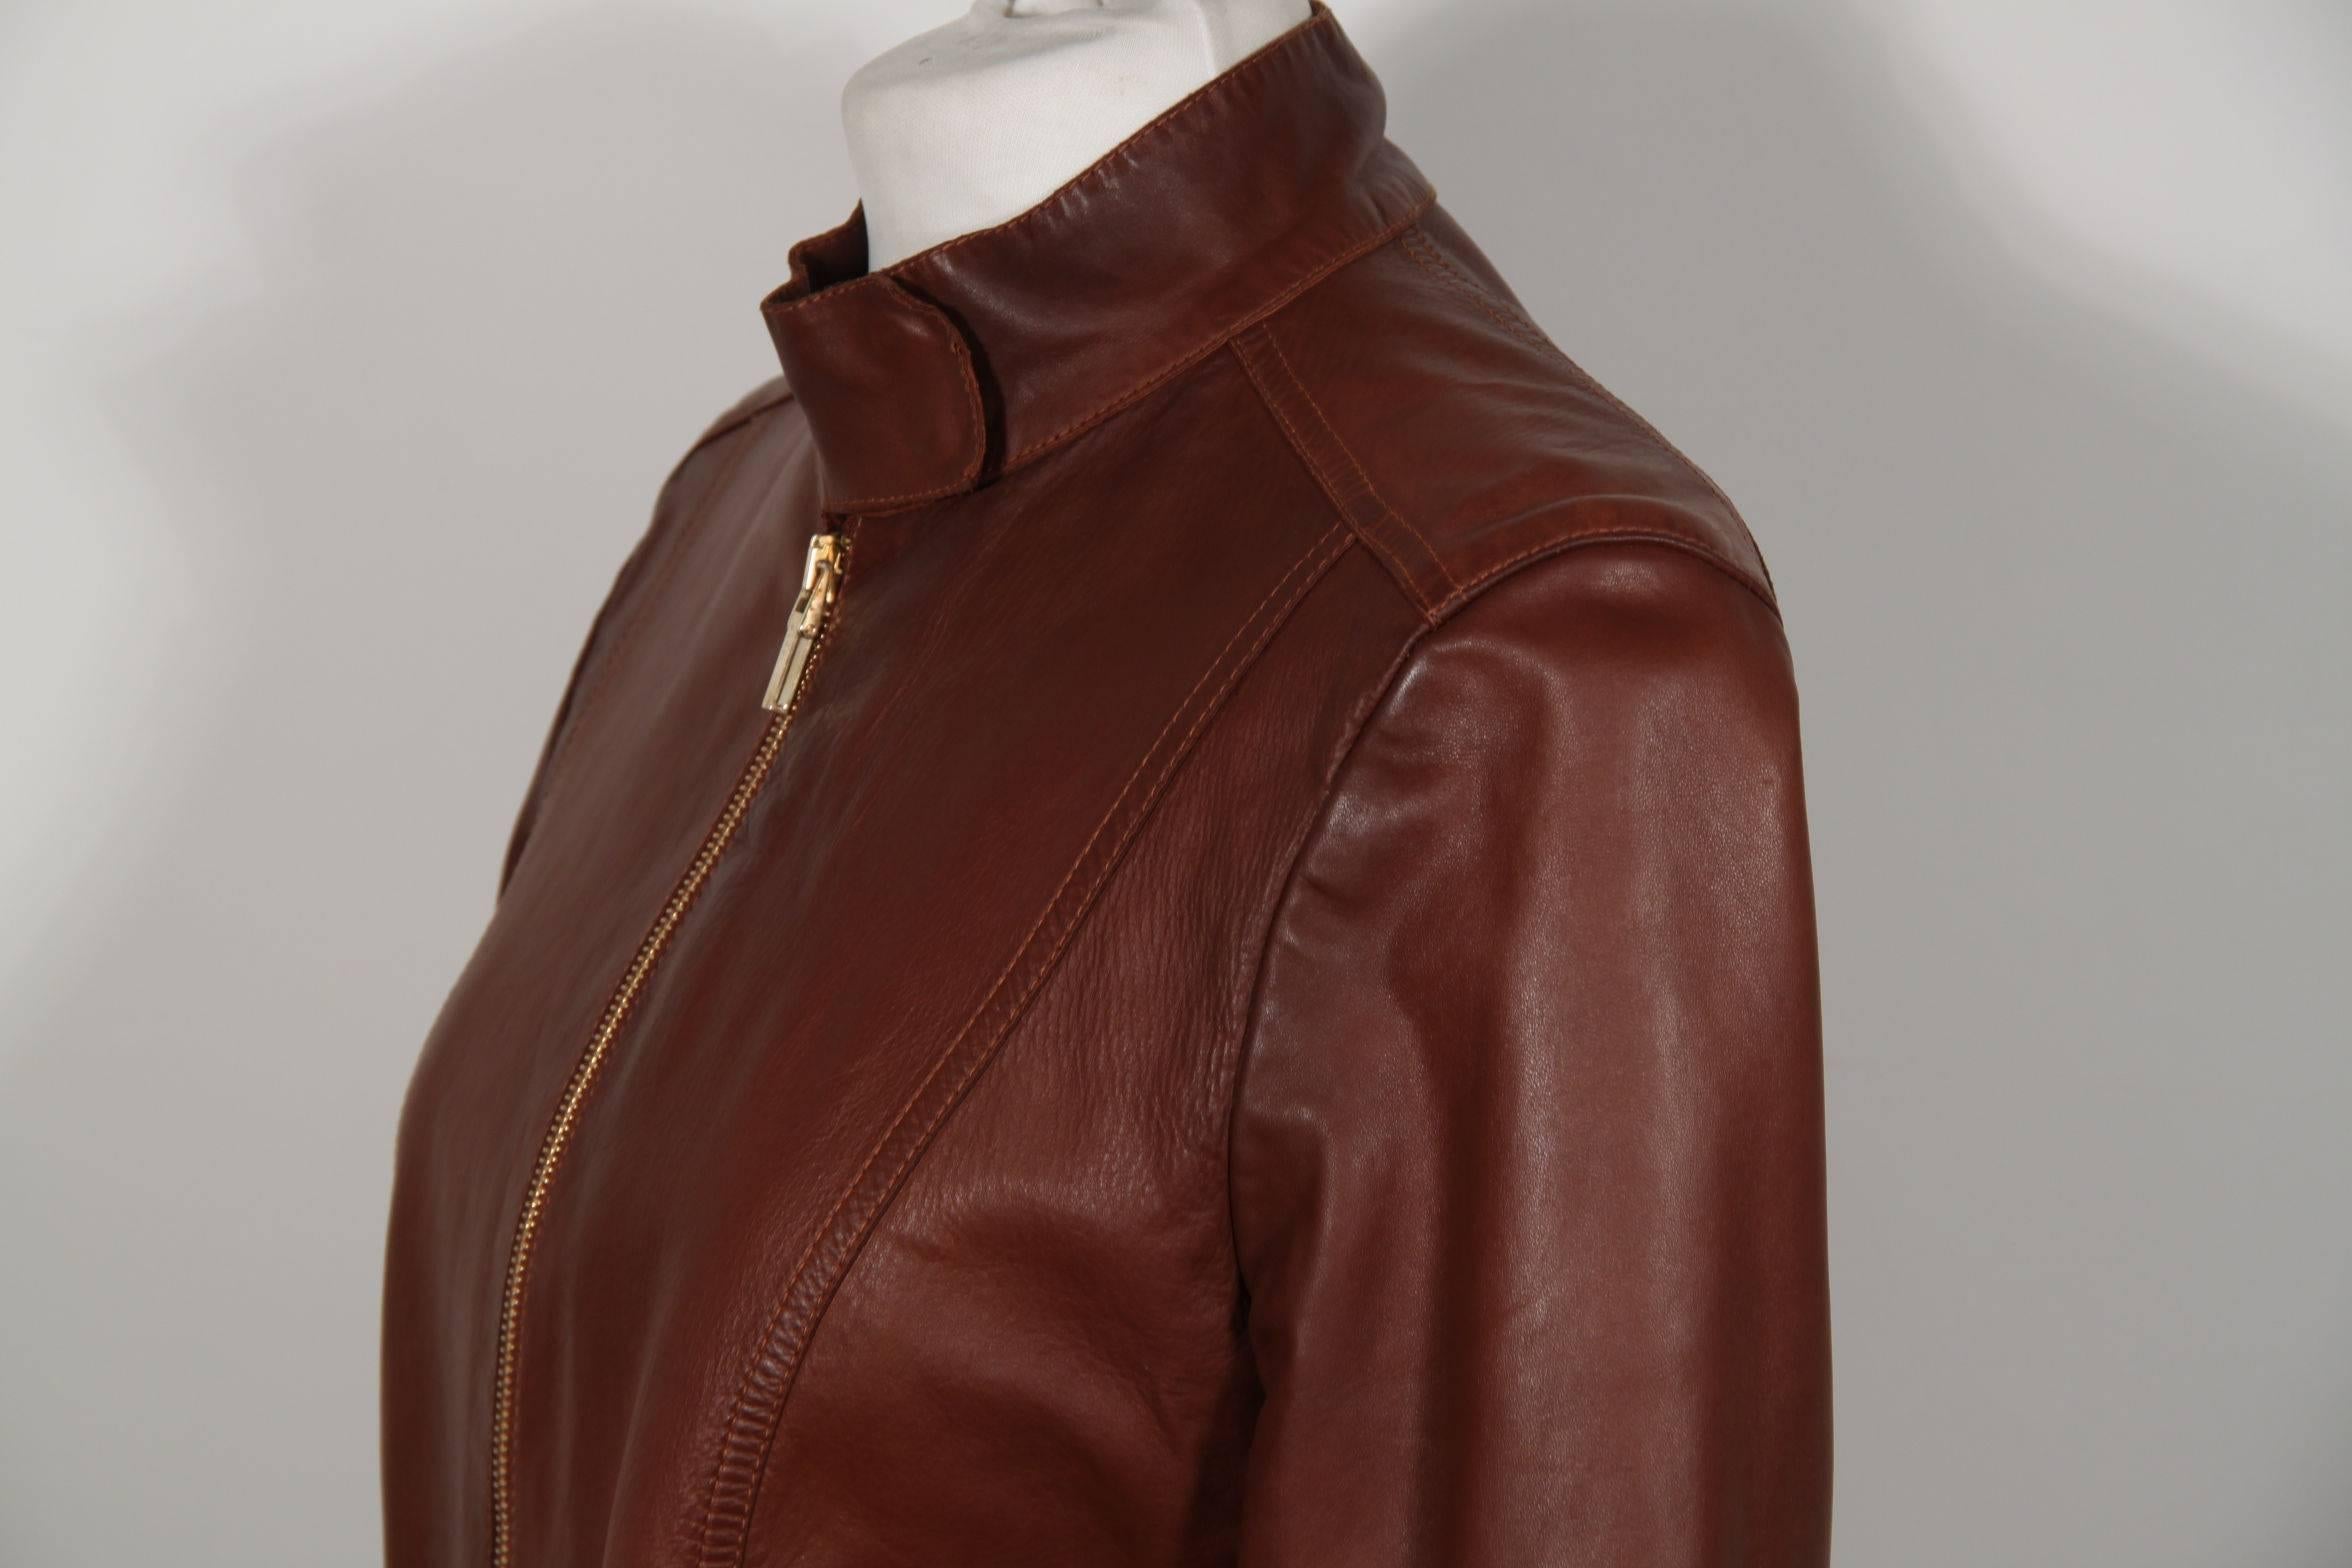 GUCCI TOM FORD Brown LEATHER Biker JACKET Zip Front Sz 40 2